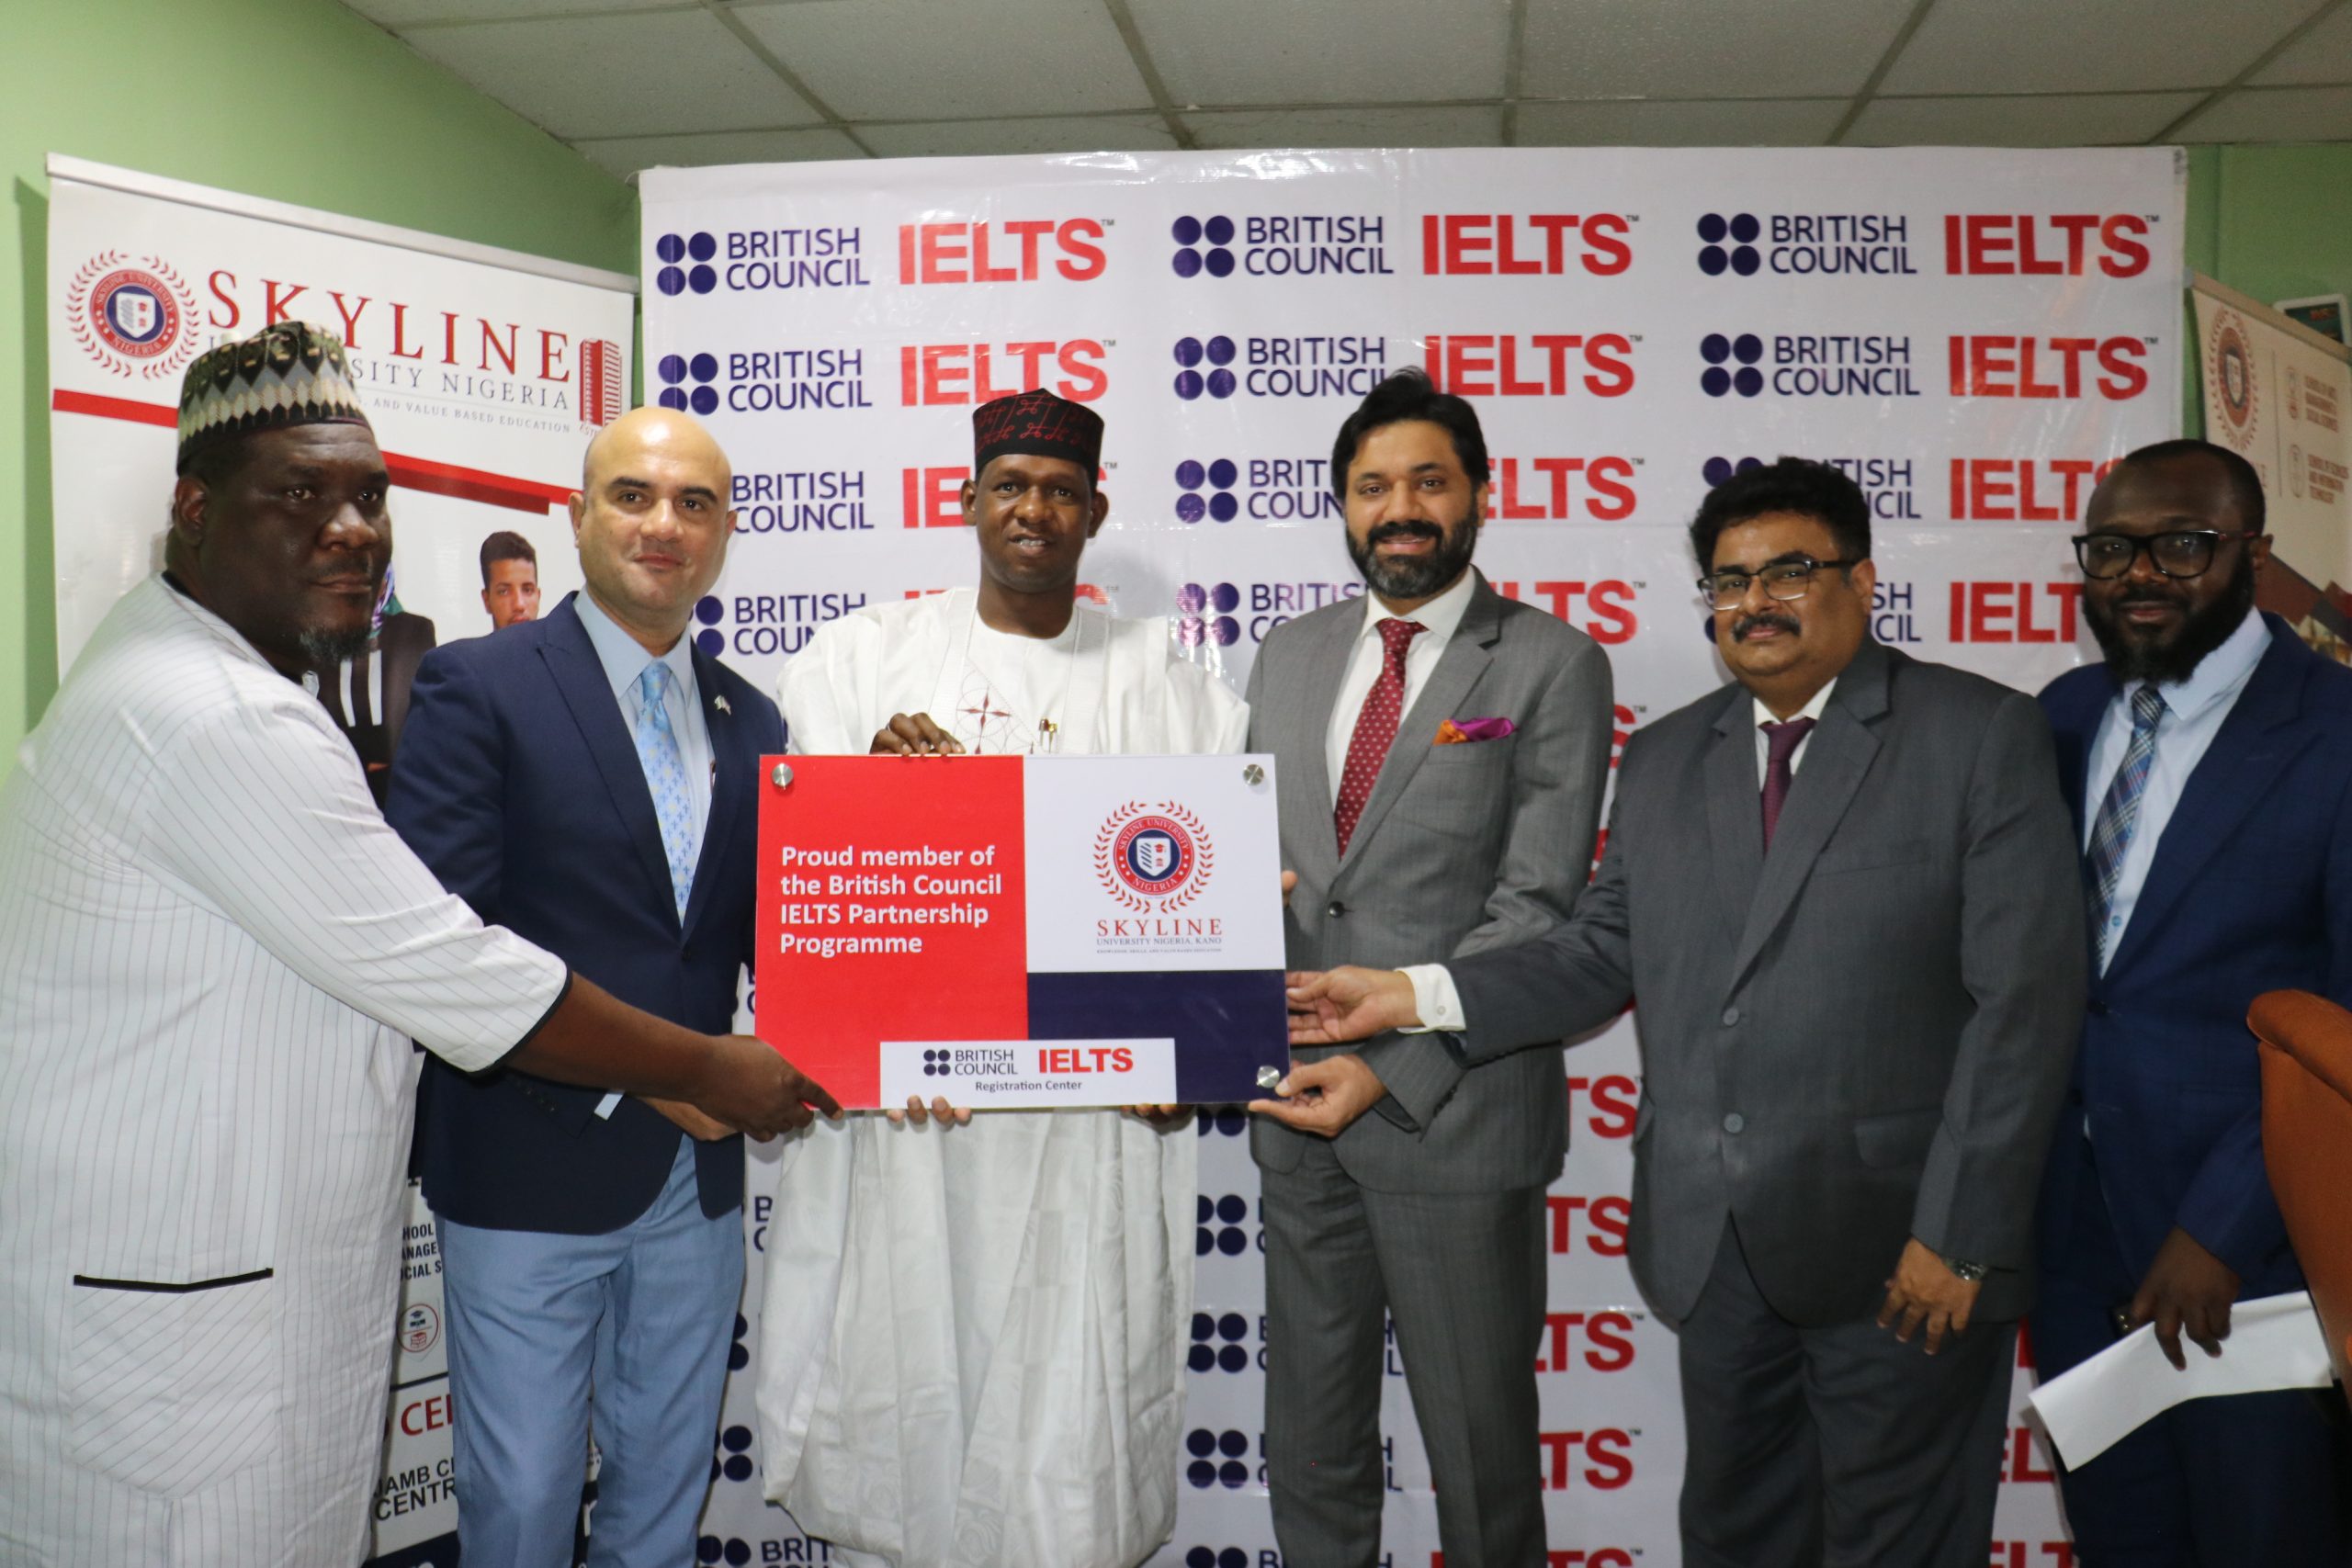 IELTS LAUNCH AND PARTNERSHIP